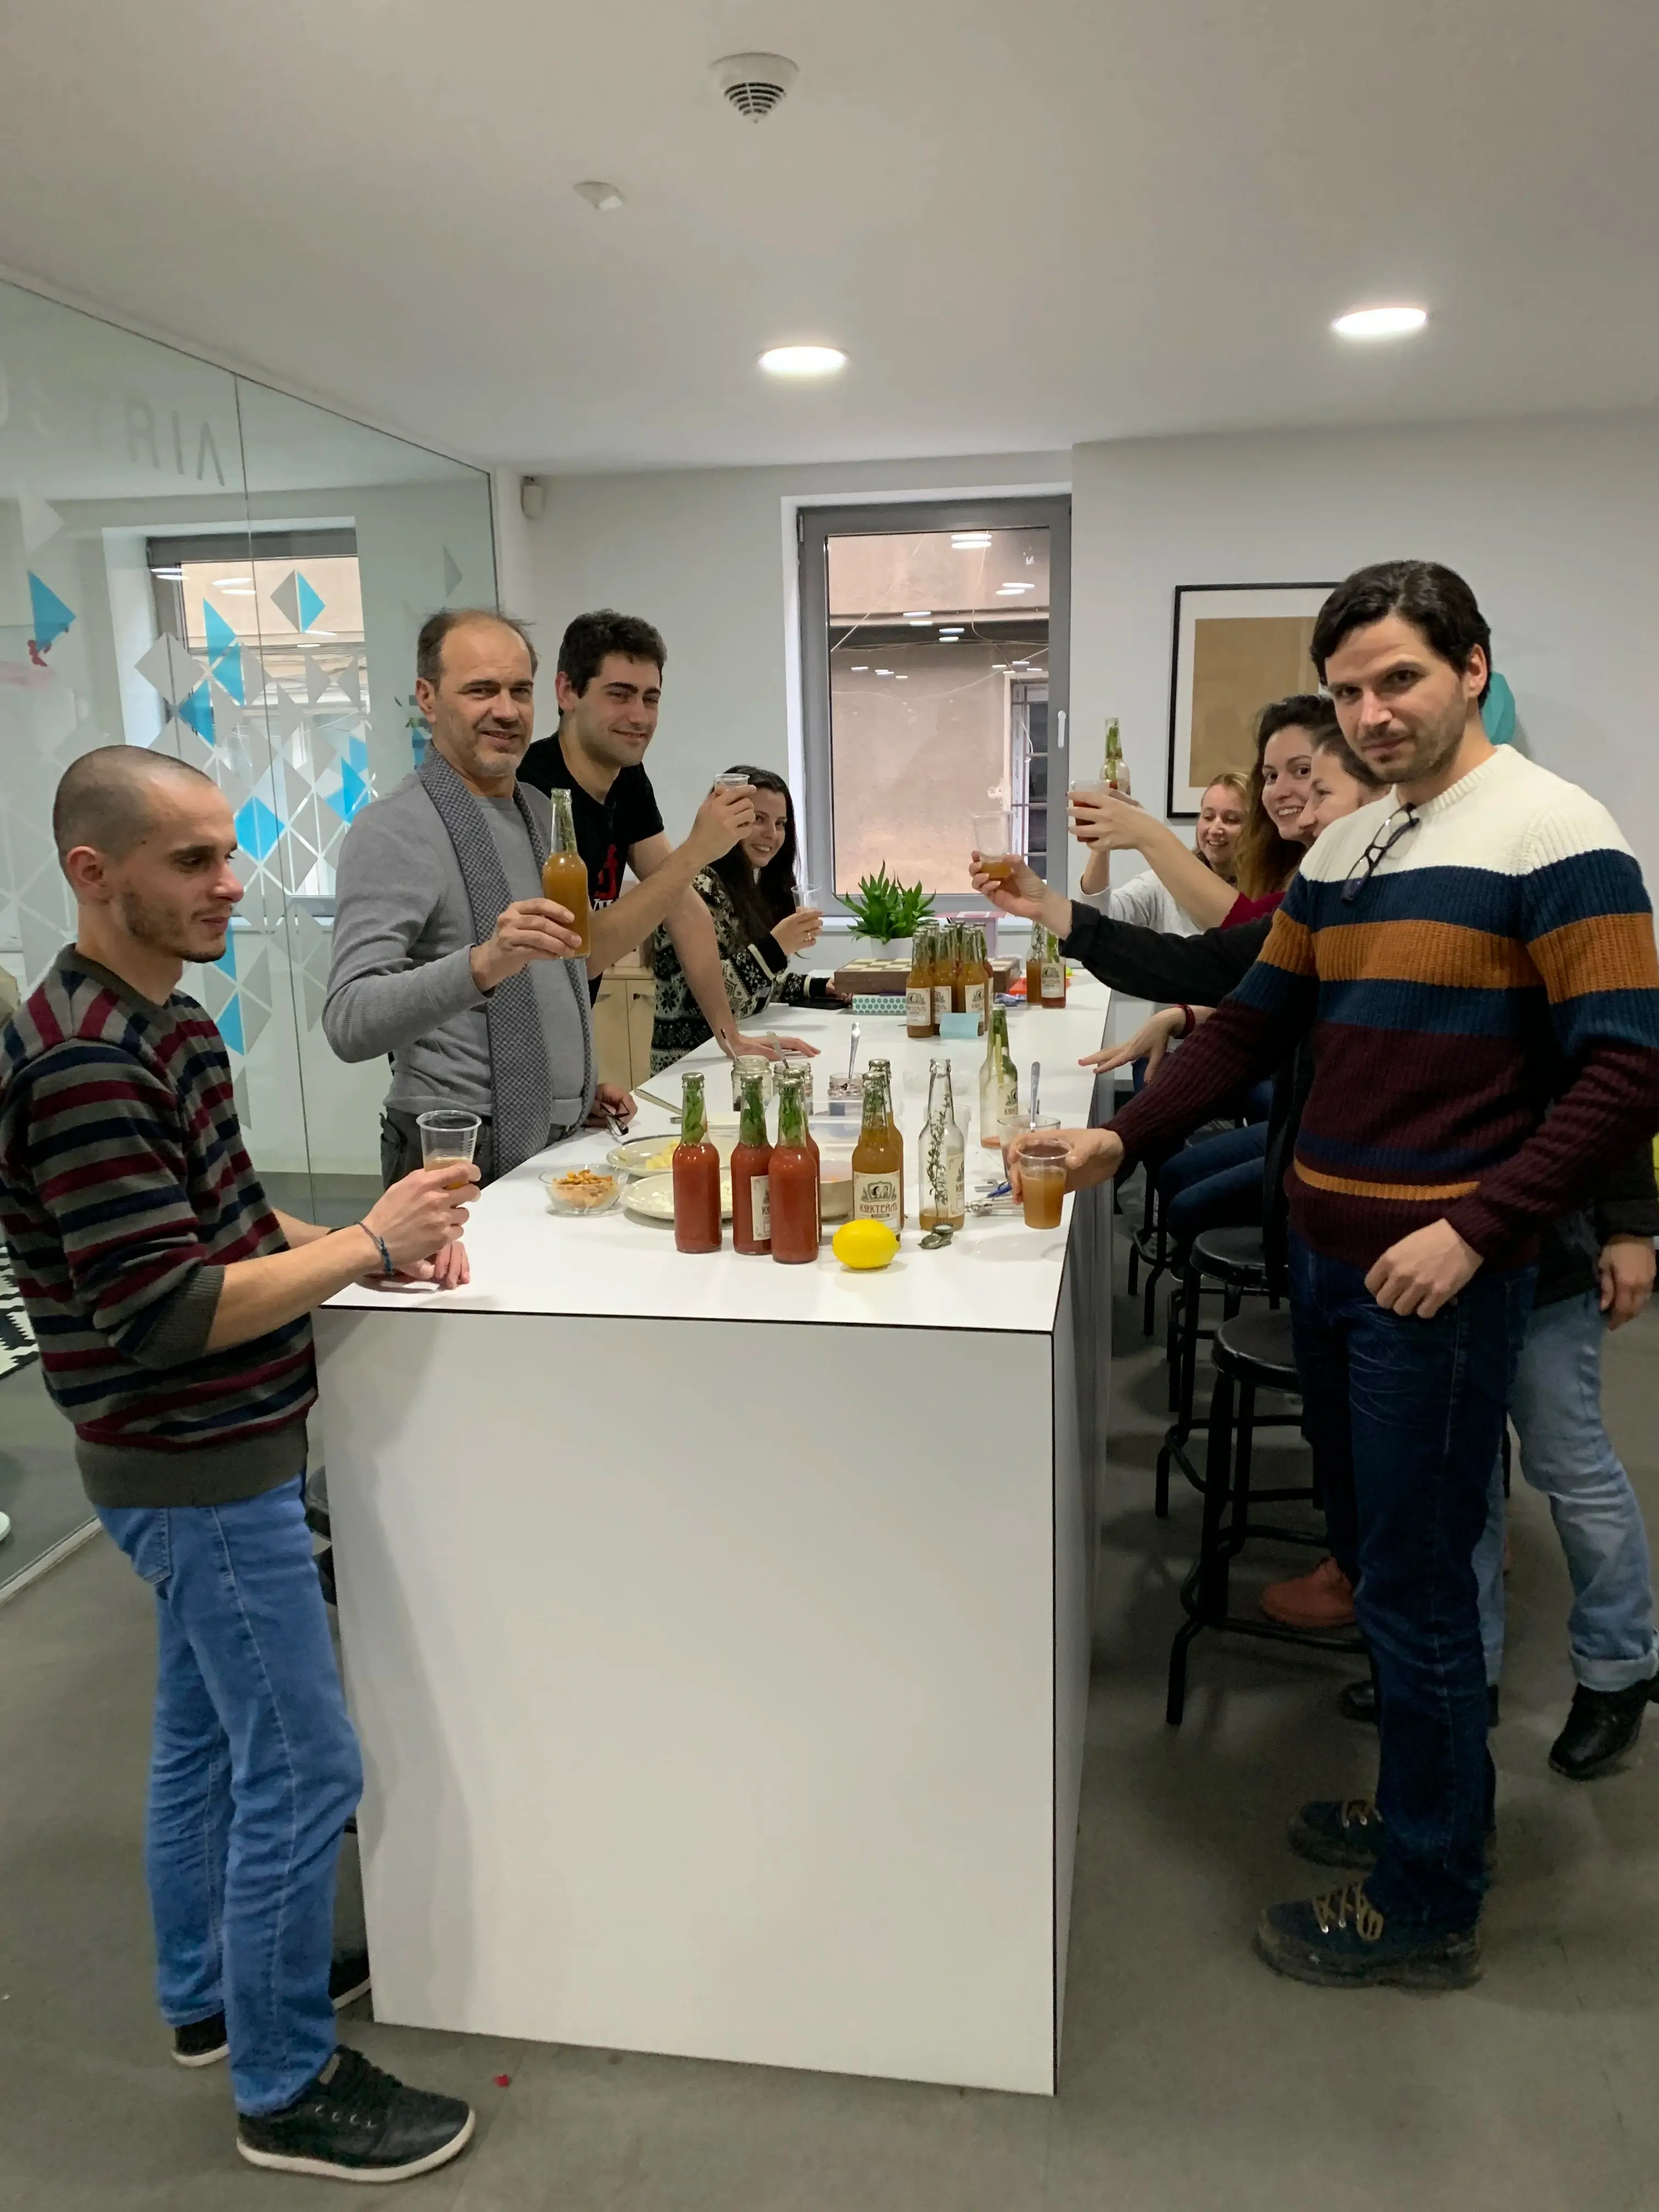 INDUSTRIA's Corda Team Lead, Nino Bonev, sharing cocktails he has made with the INDUSTRIA team